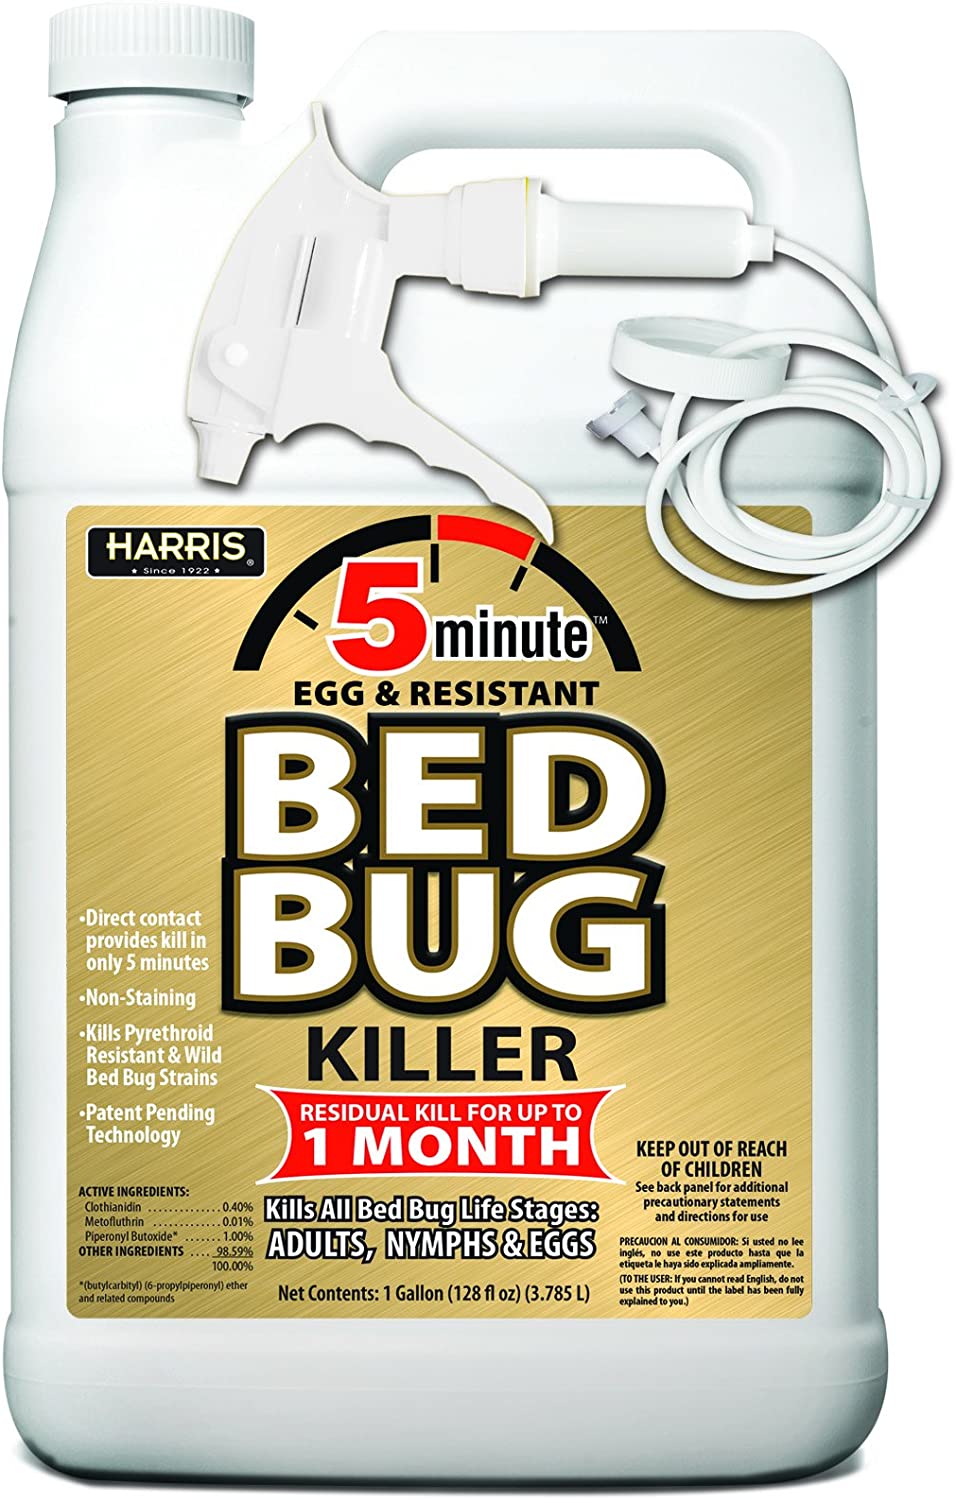 Harris 5 Minute Bed Bug Killer kills bed bugs in just 5 minutes after contact. Patent pending technology with long residual kill. This bed bug spray is EPA registered and is a Harris exclusive on the retail market.